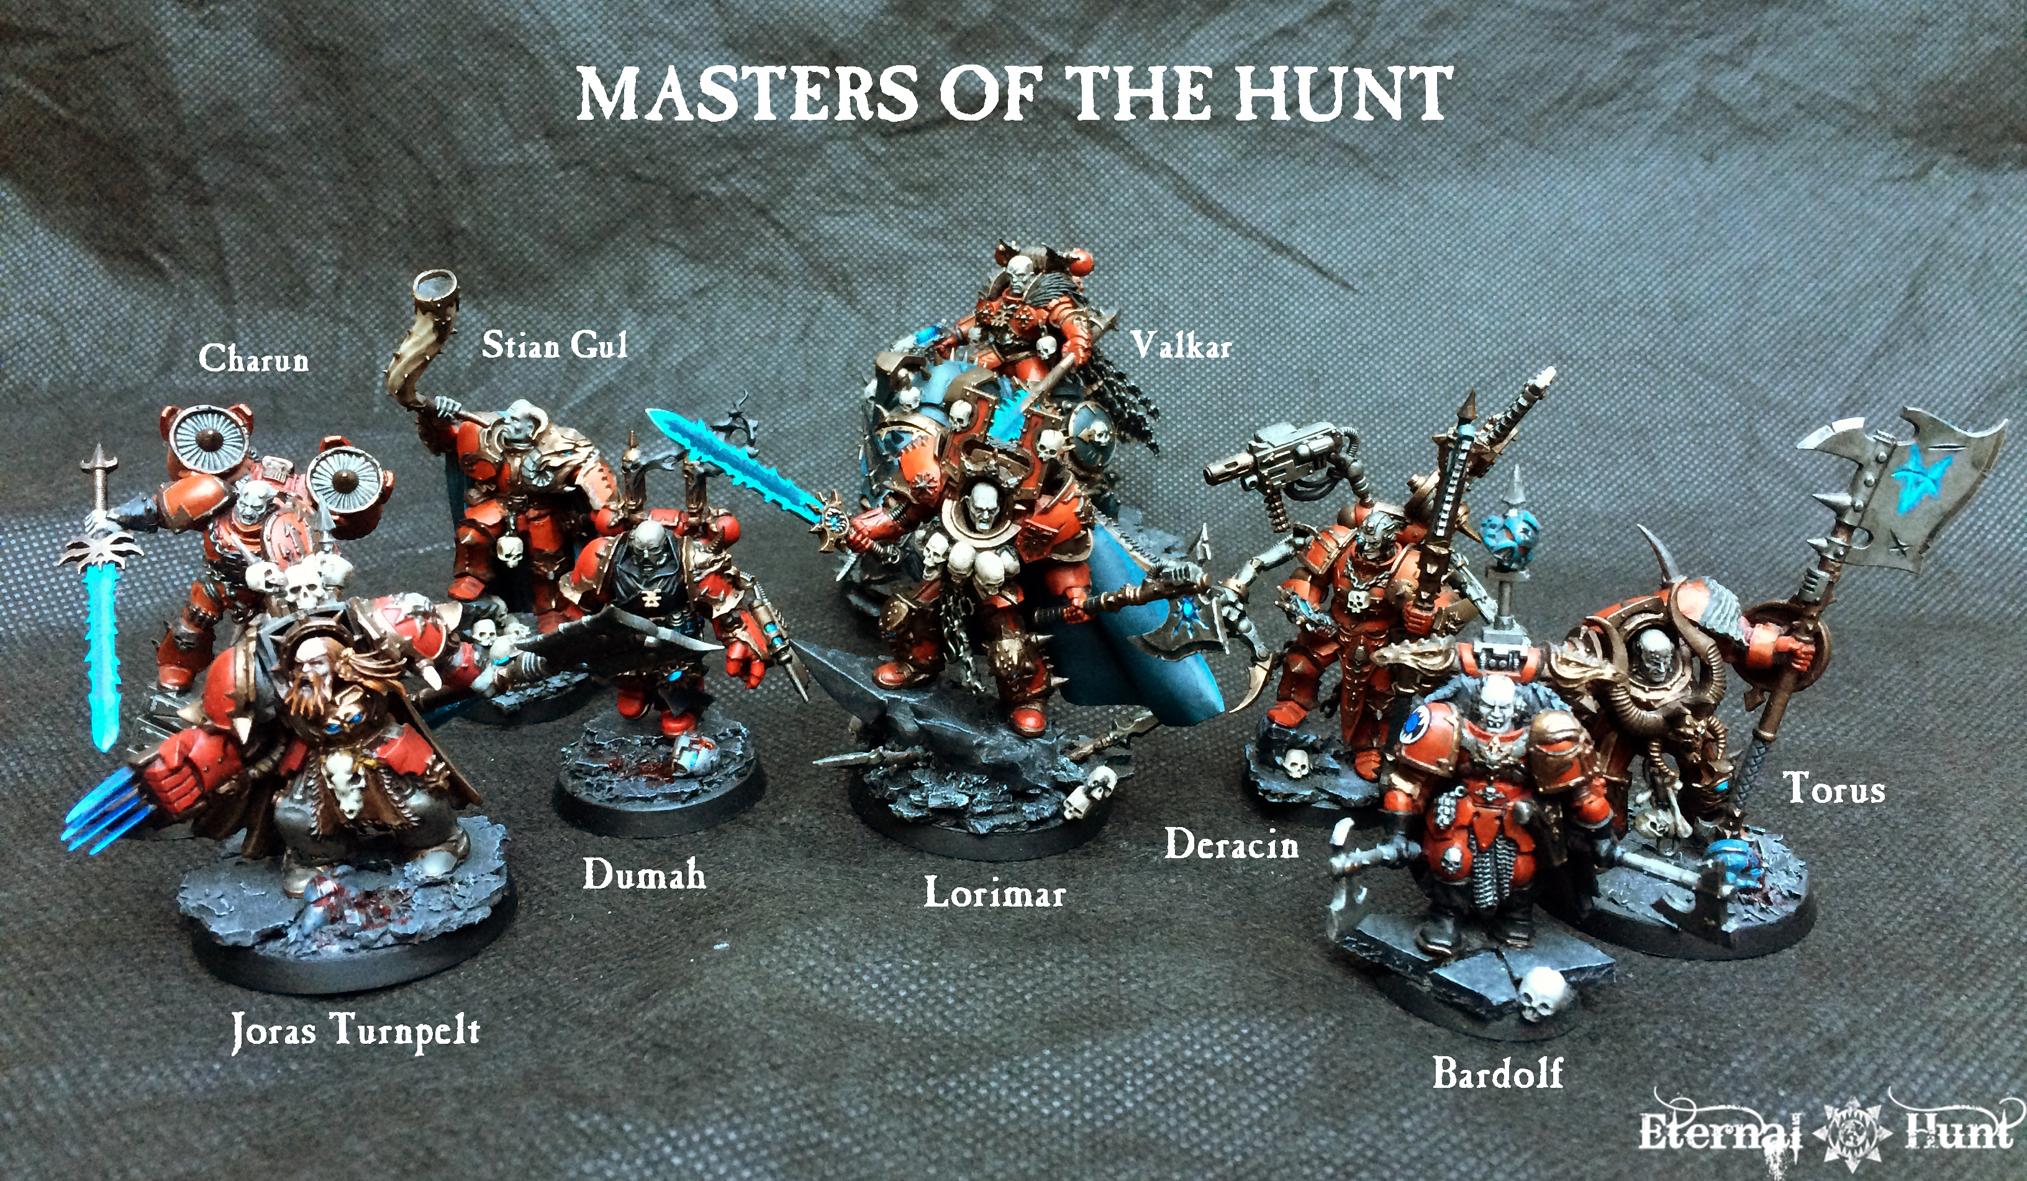 Chaos, Chaos Lord, Chaos Space Marines, Huntmaster, Khorne, Khorne's Eternal Hunt, Officers, Warhammer 40,000, Warlord, World Eaters